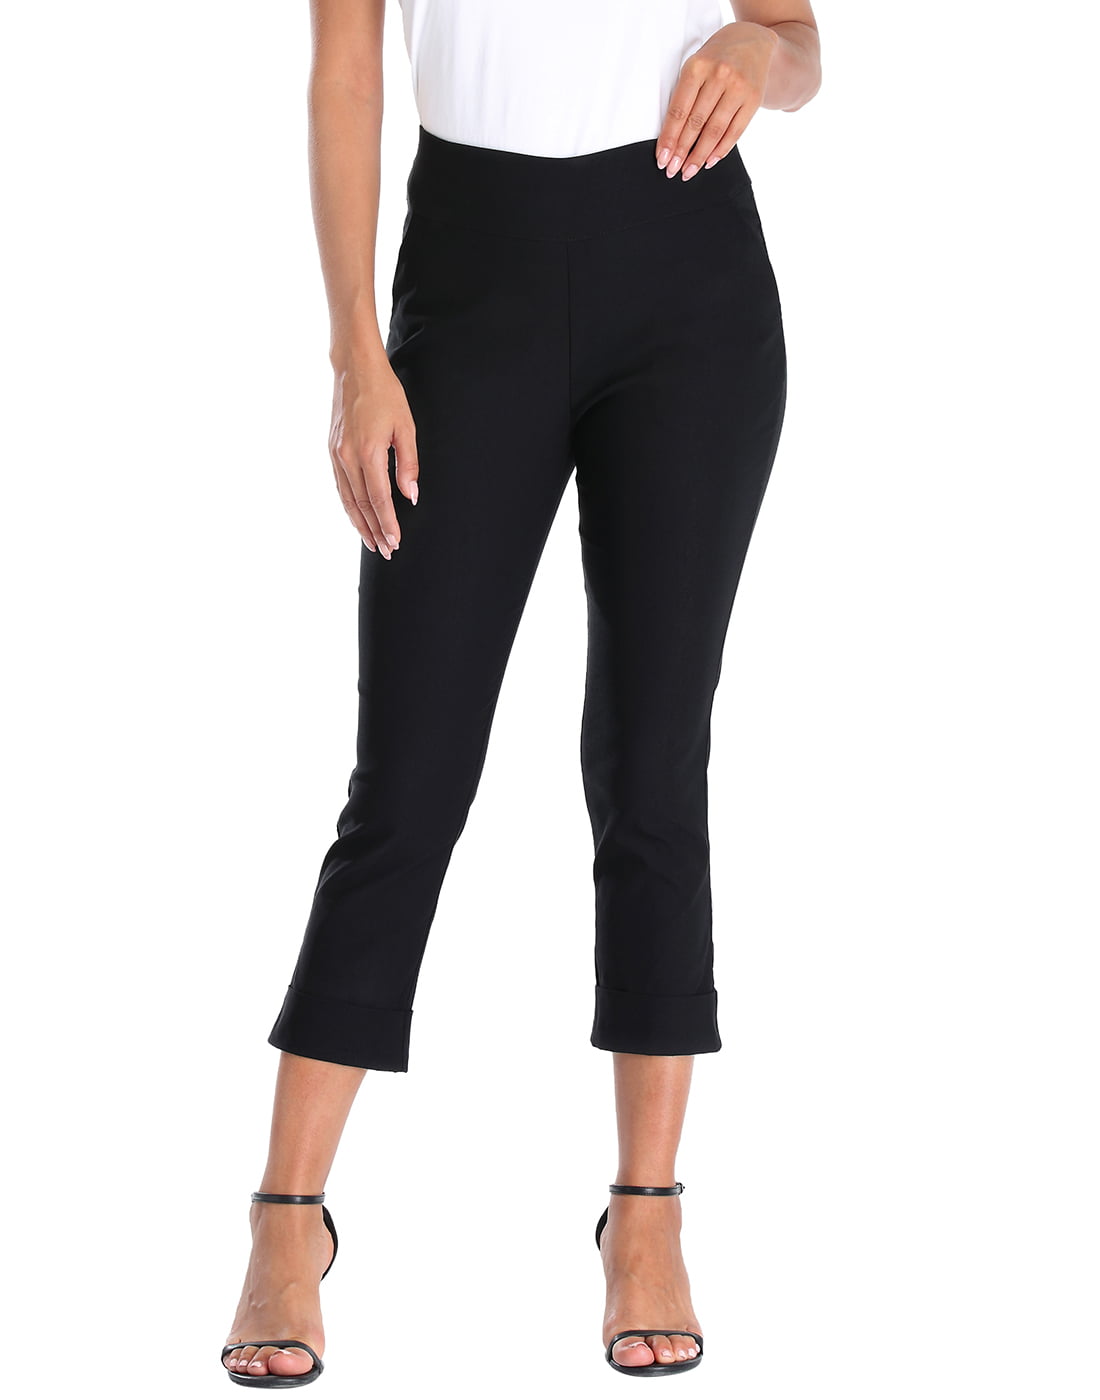 HDE Pull On Capri Pants For Women with Pockets Elastic Waist Cropped Pants  Navy Blue - S